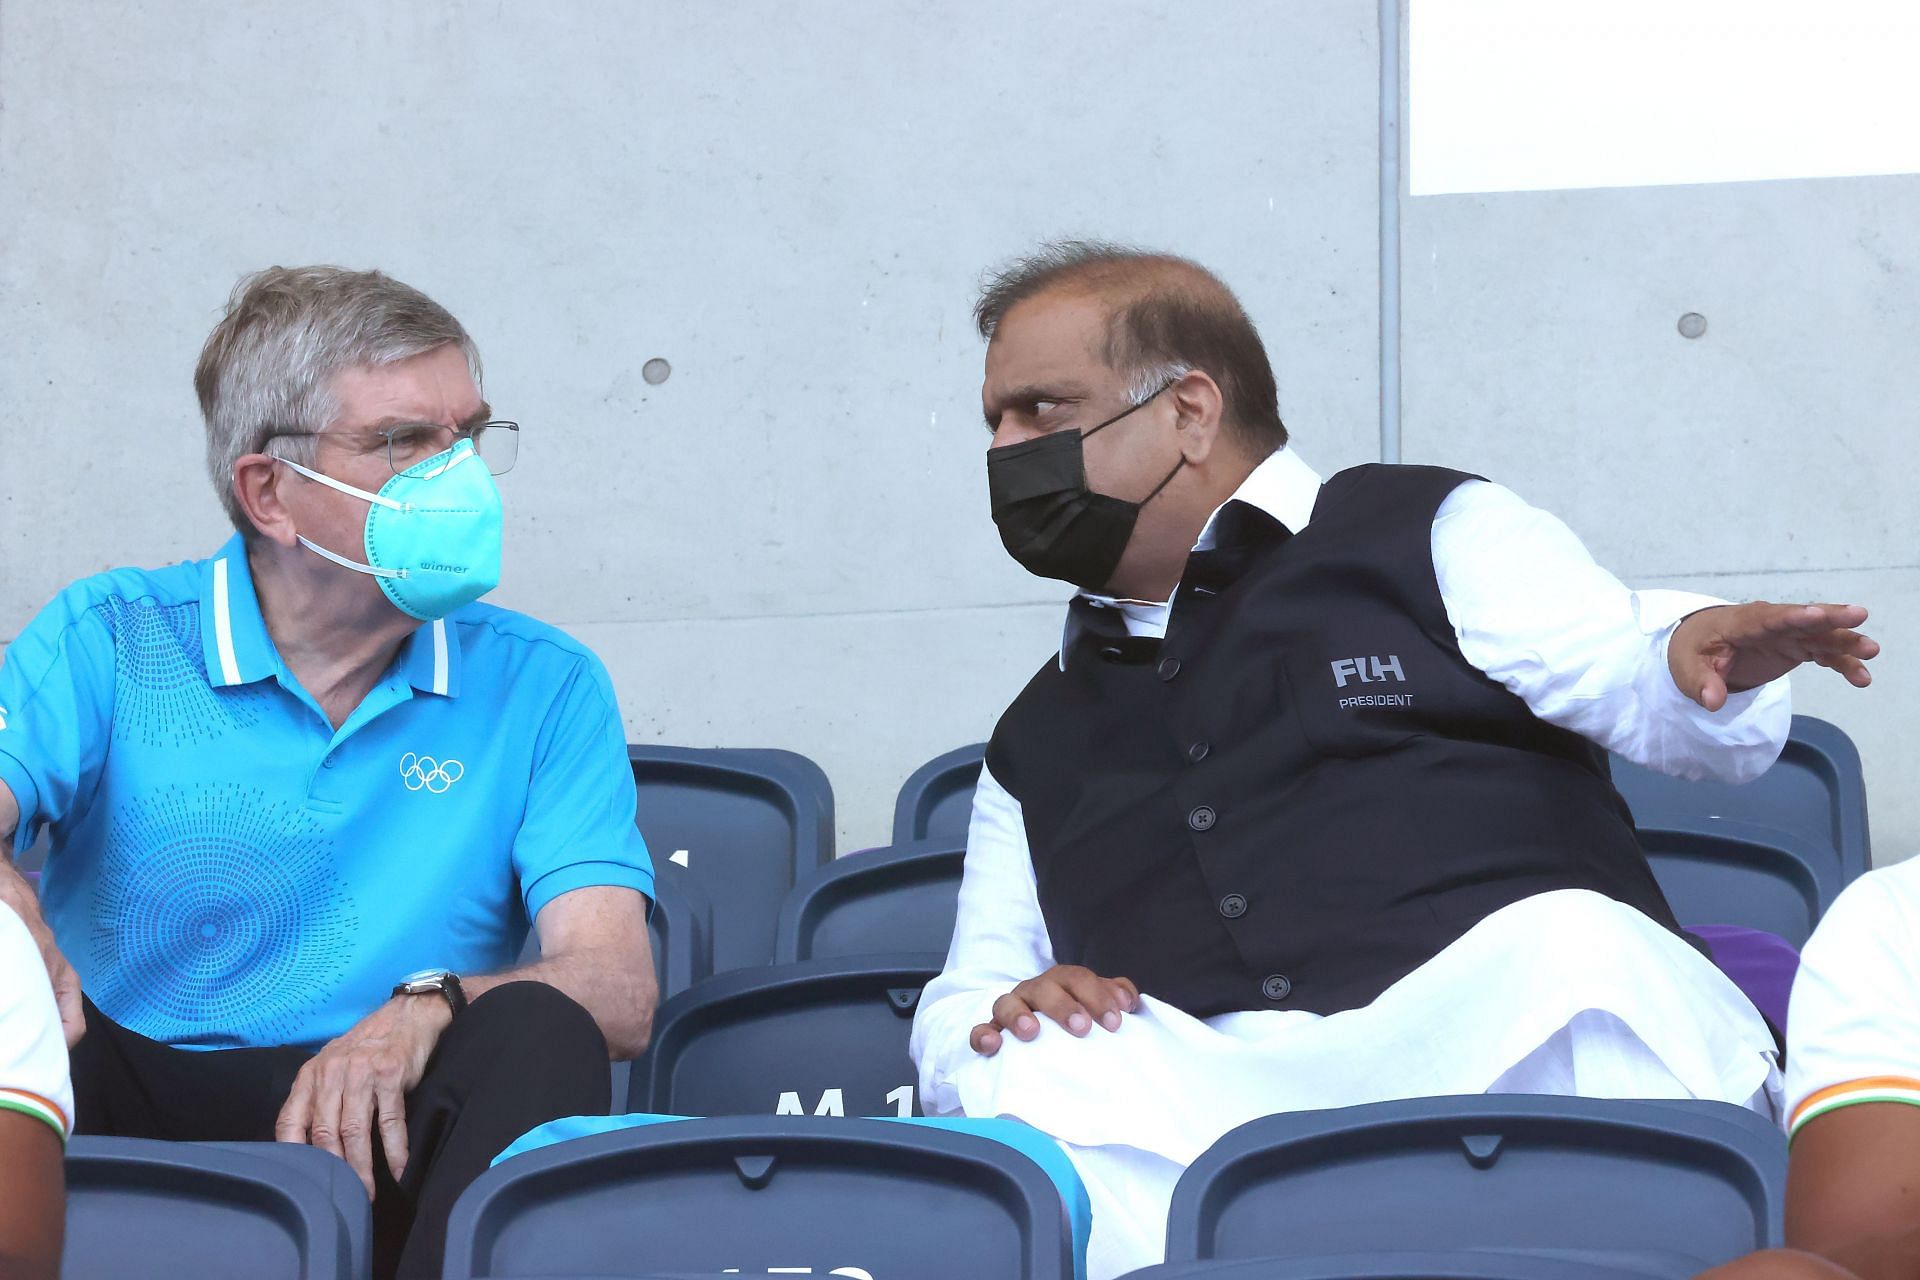 IOA President Narinder Batra (right) with Thomas Bach. (PC: Getty Images)